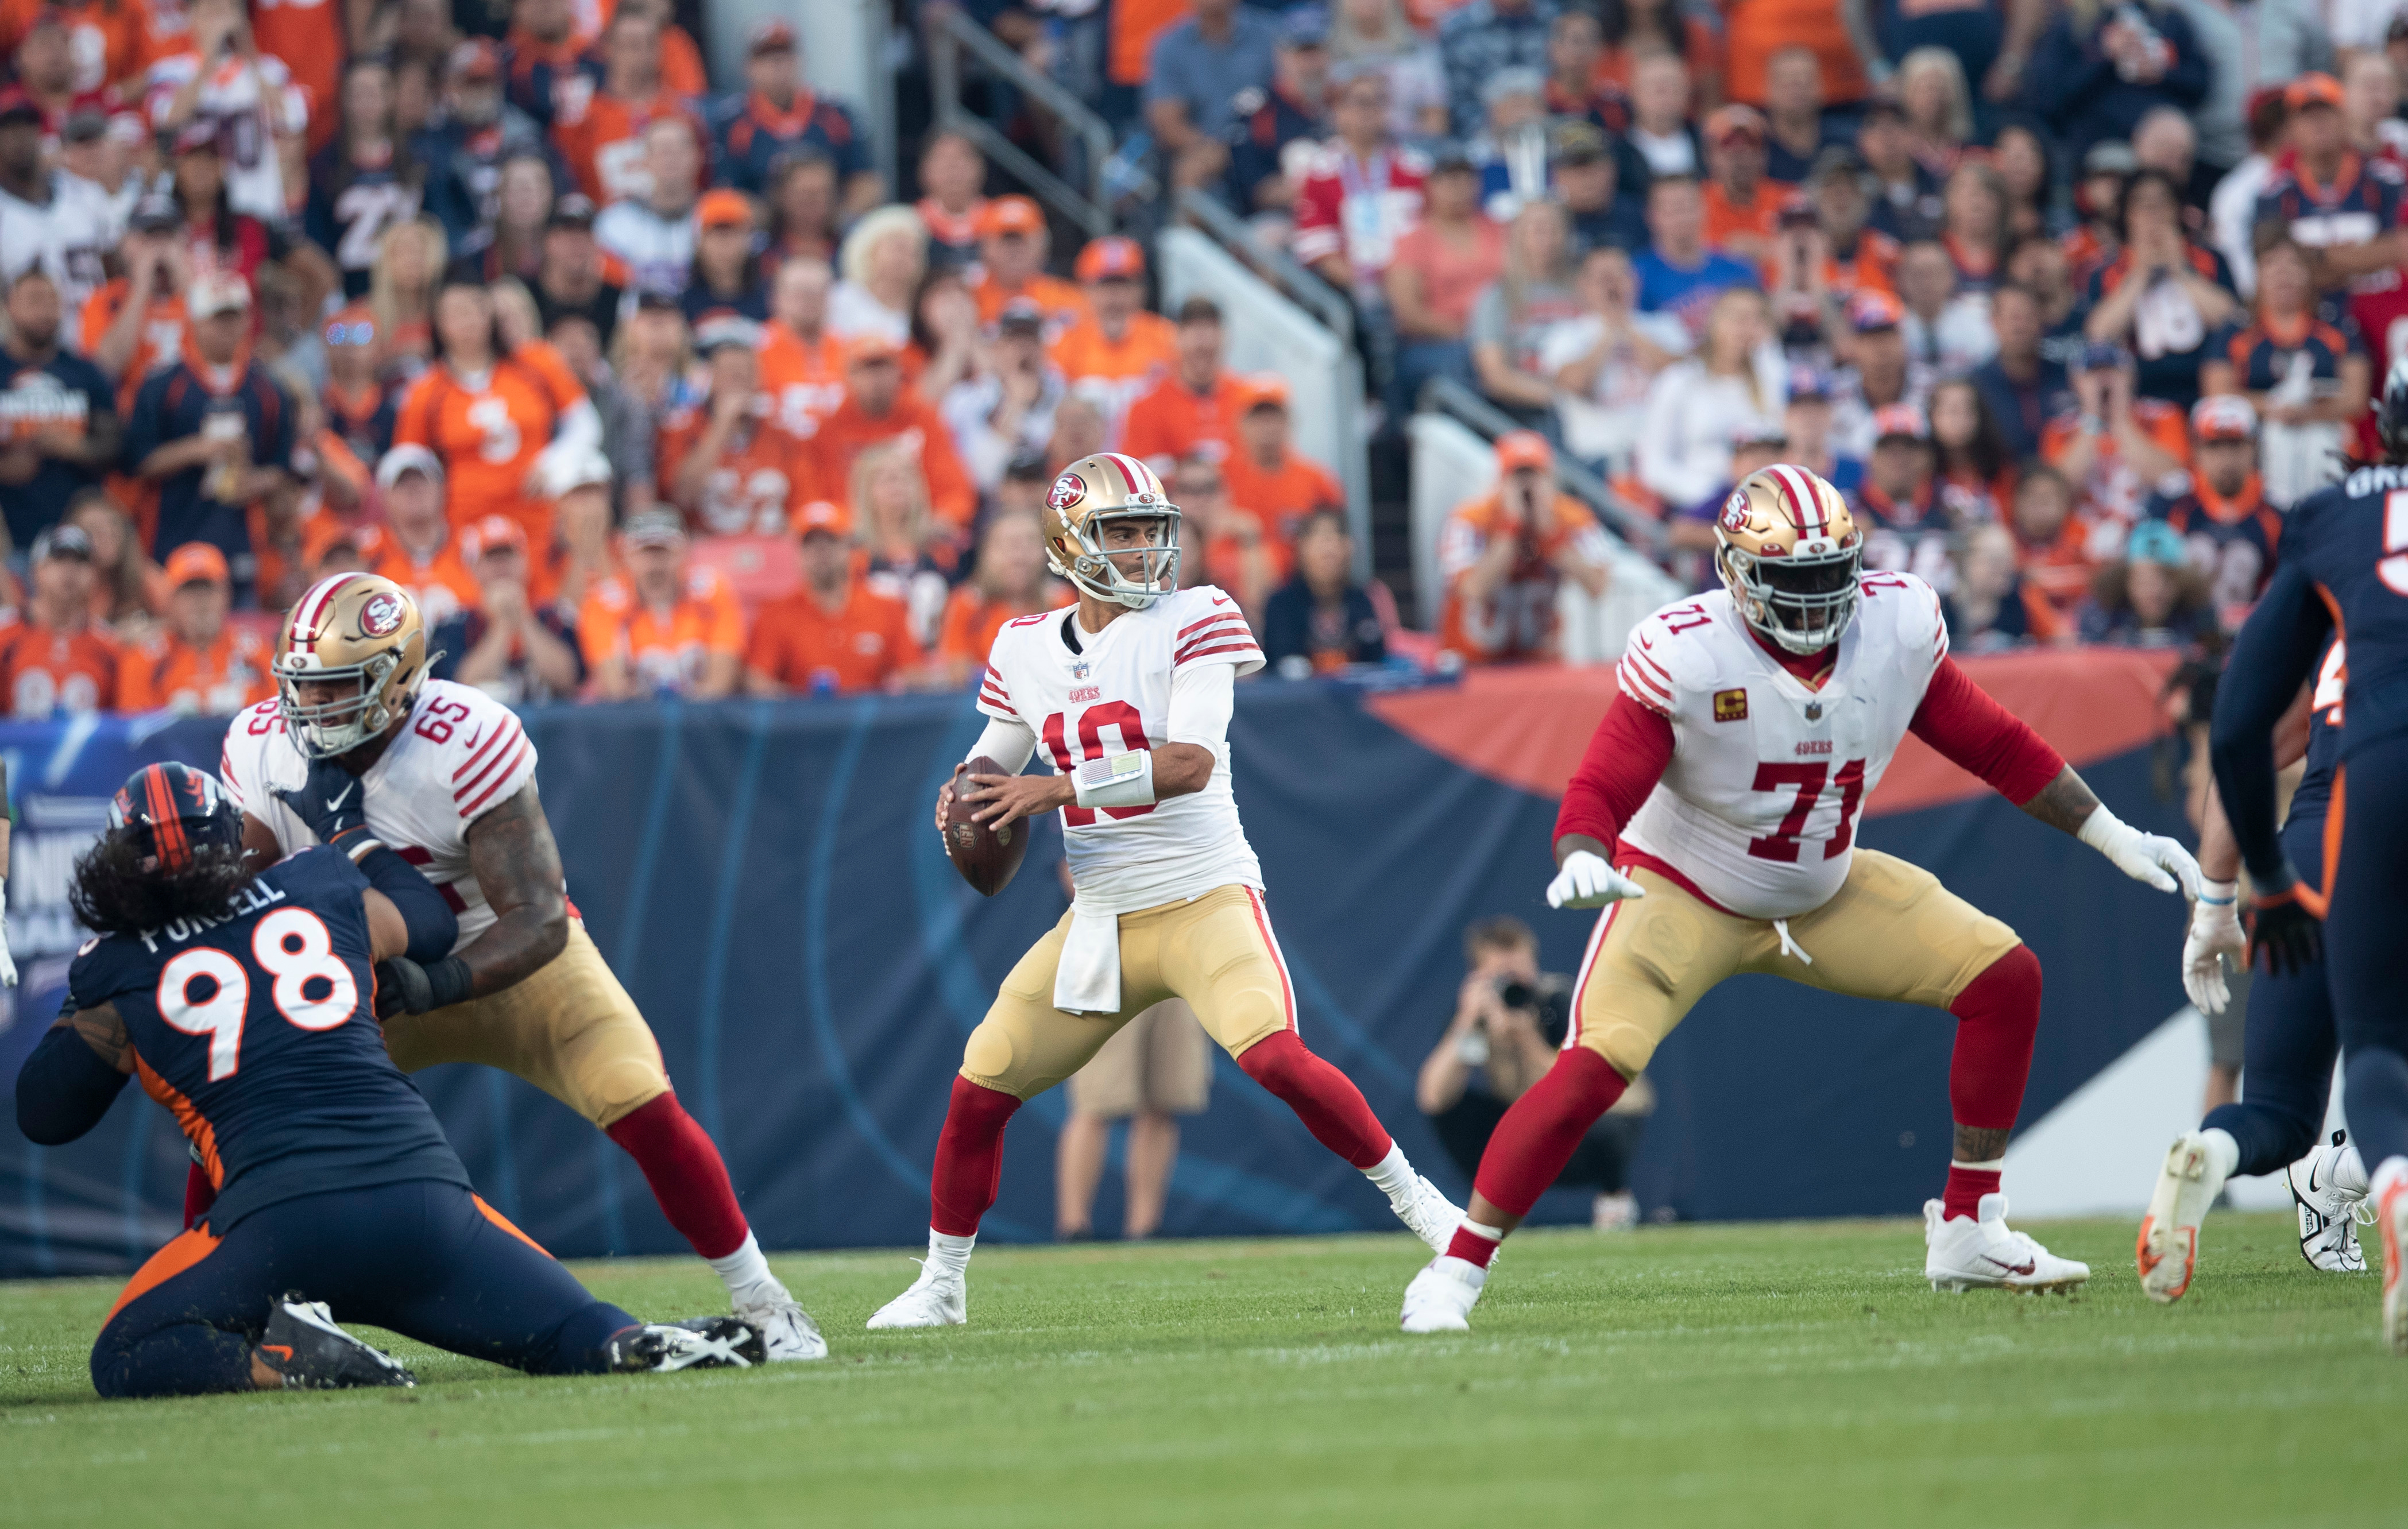 Jimmy Garoppolo #10 of the San Francisco 49ers passes during the game against the Denver Broncos at Empower Field At Mile High on September 25, 2022 in Denver, Colorado.